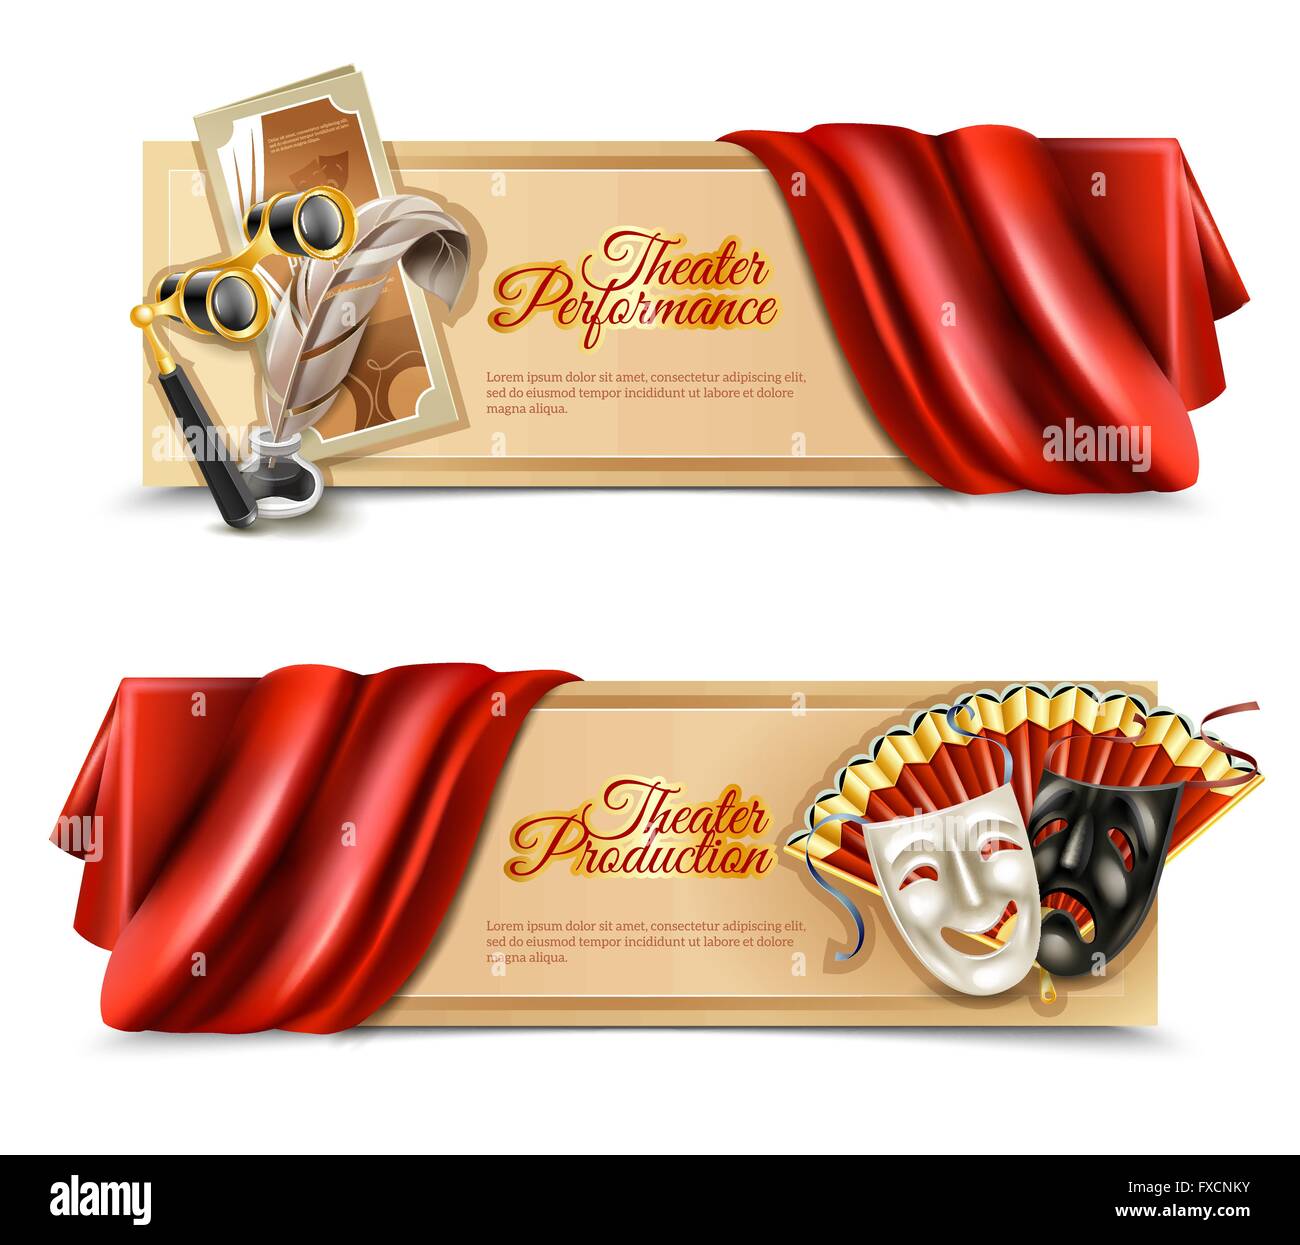 Theatre Performance Banners Set Stock Vector